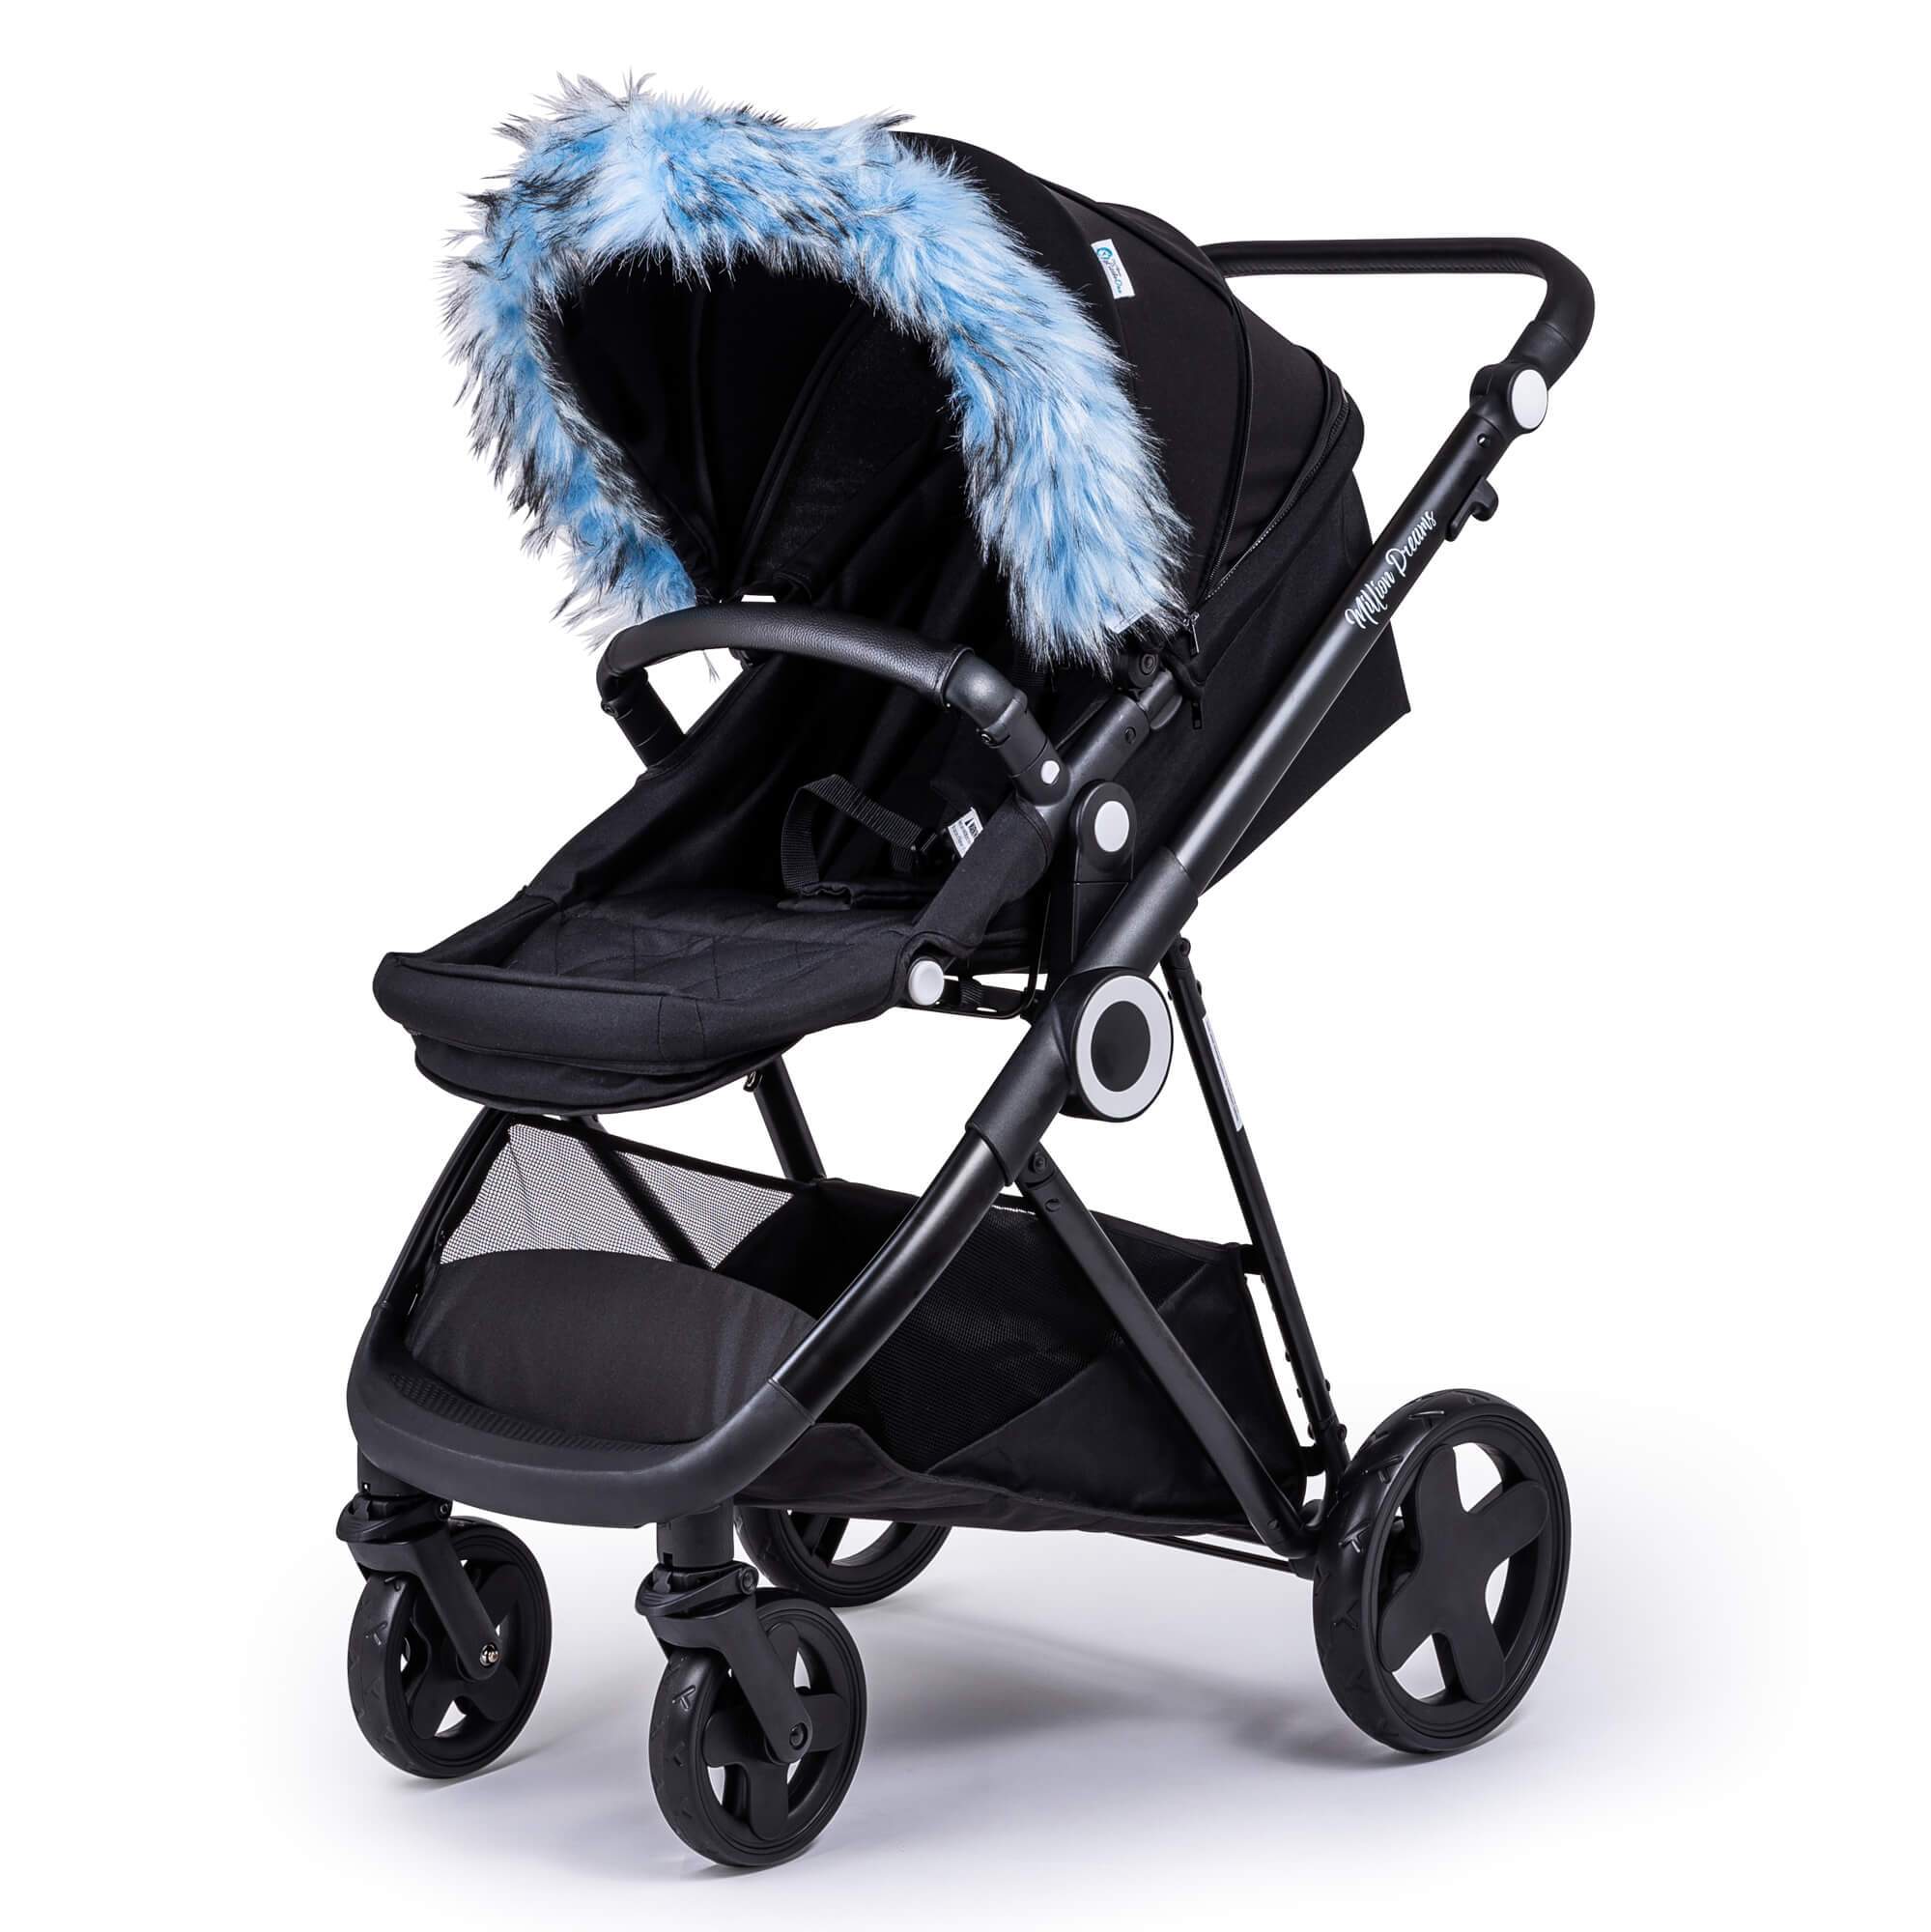 Pram Fur Hood Trim Attachment for Pushchair Compatible with Casual - Light Blue / Fits All Models | For Your Little One